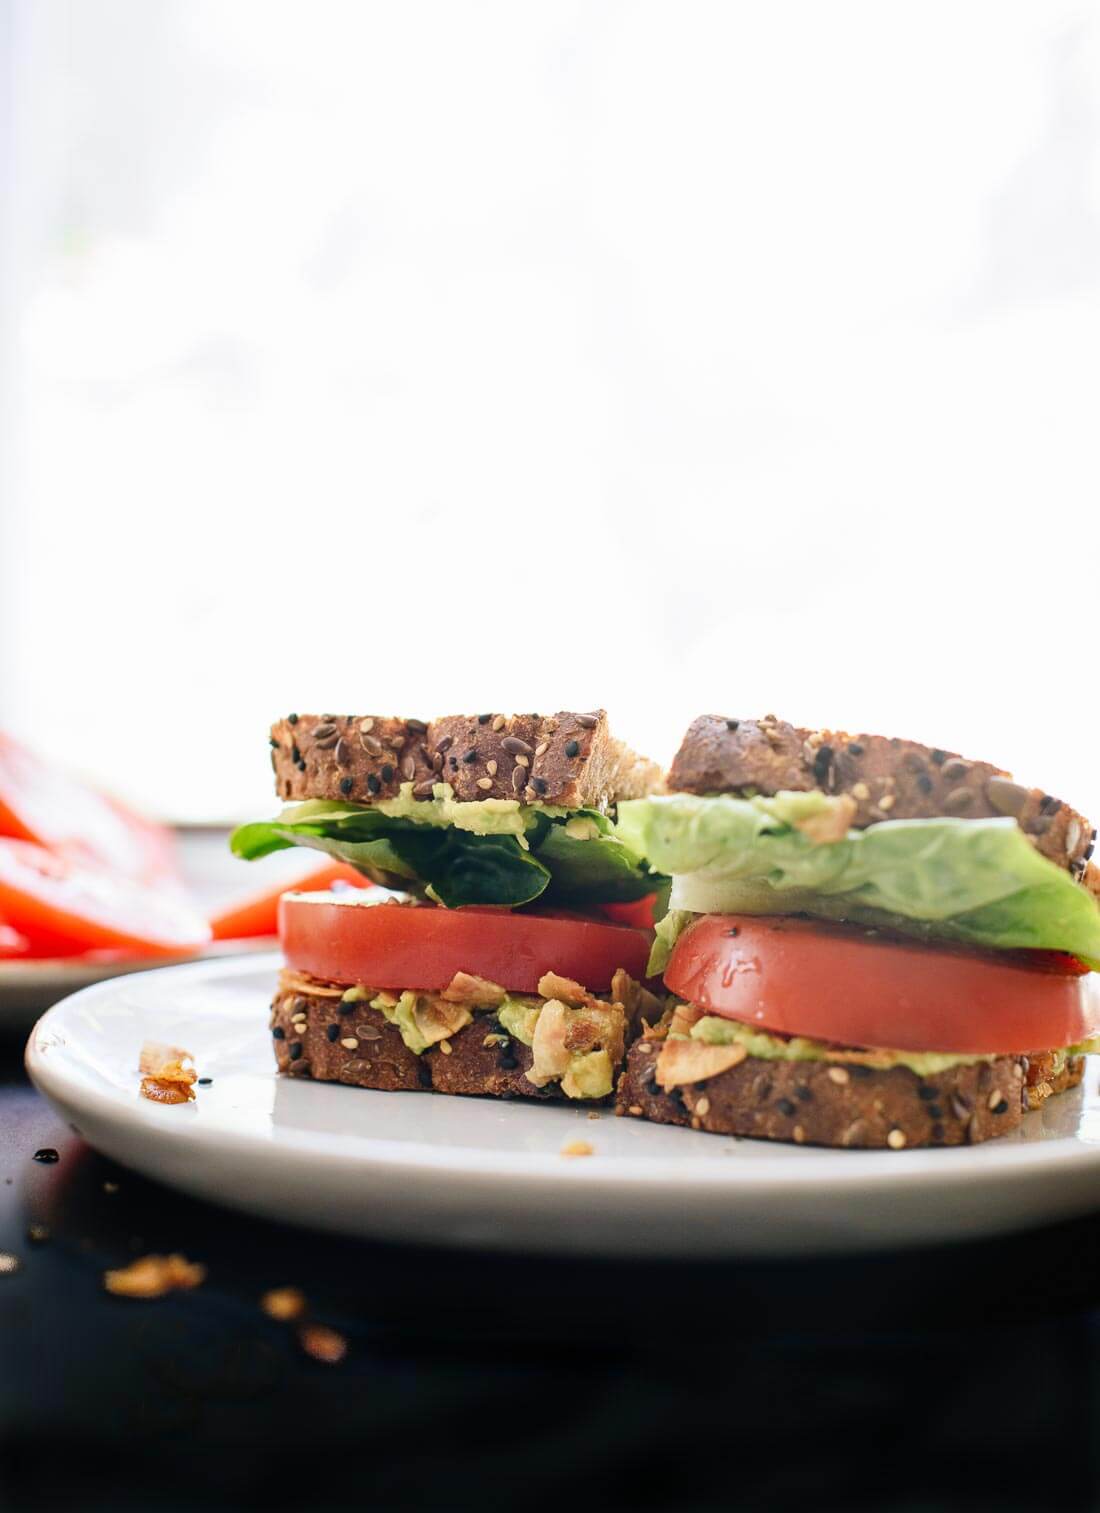 This delicious vegetarian/vegan BLT sandwich is a healthier spin on the classic BLT! cookieandkate.com